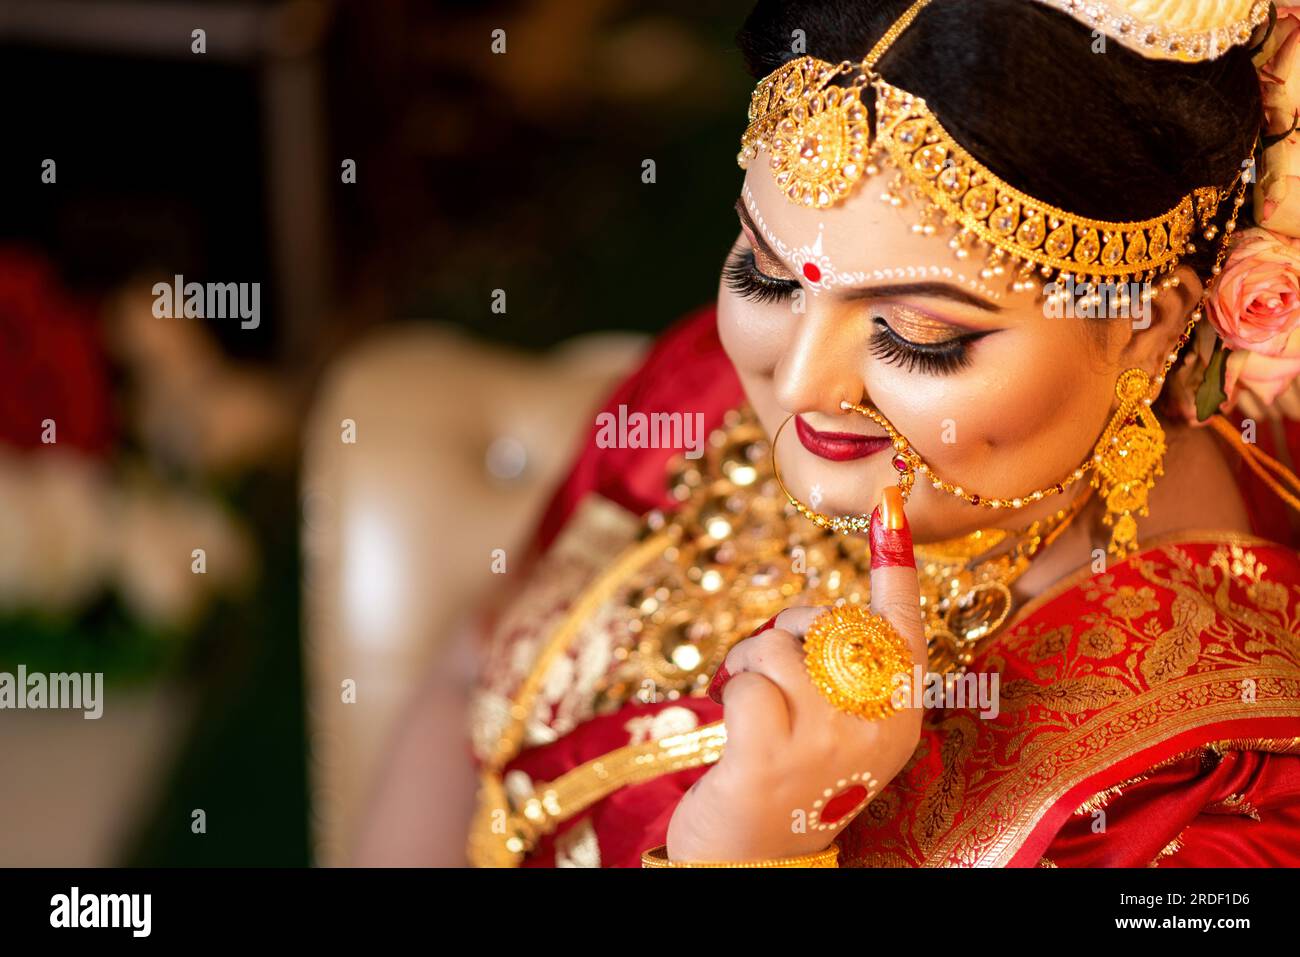 July 21, 2023, Dhaka, Dhaka, Bangladesh: A Bangladeshi Hindu bride wears traditional gold Jewellery during the wedding ceremony in Dhaka, Bangladesh. The price of gold in Bangladesh has surged to a new all-time high, crossing the Tk 0.1 million-mark for the first time. The Bangladesh Jewellers' Association (BAJUS) announced on Thursday that the new price of gold per bhori (11.664 grams) is Tk 100,778. This is an increase of Tk 1,984 from the previous price of Tk 98,794. The surge in gold prices is attributed to the rise in the international market. The price of metal on the international marke Stock Photo